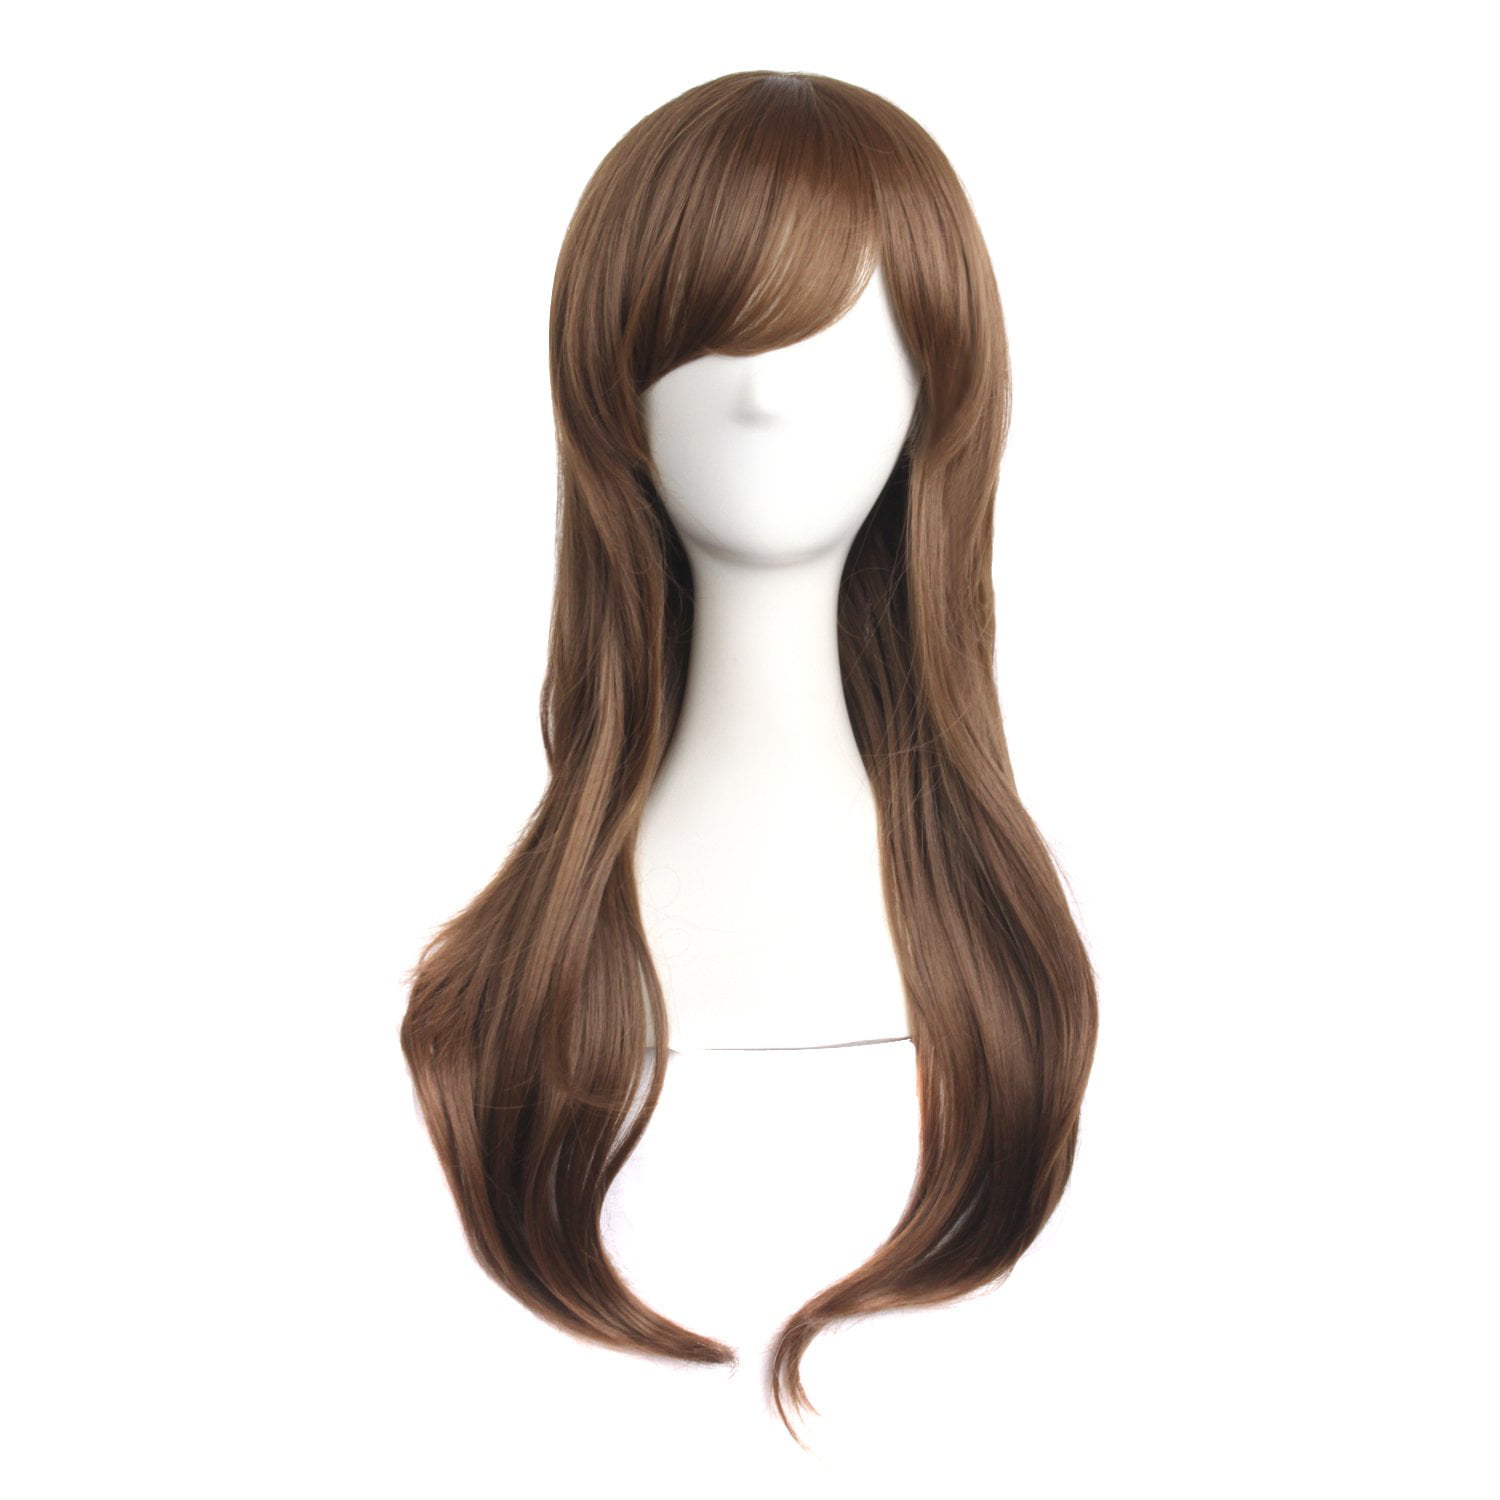 Curly Long Hair Costume Wig Light Brown 